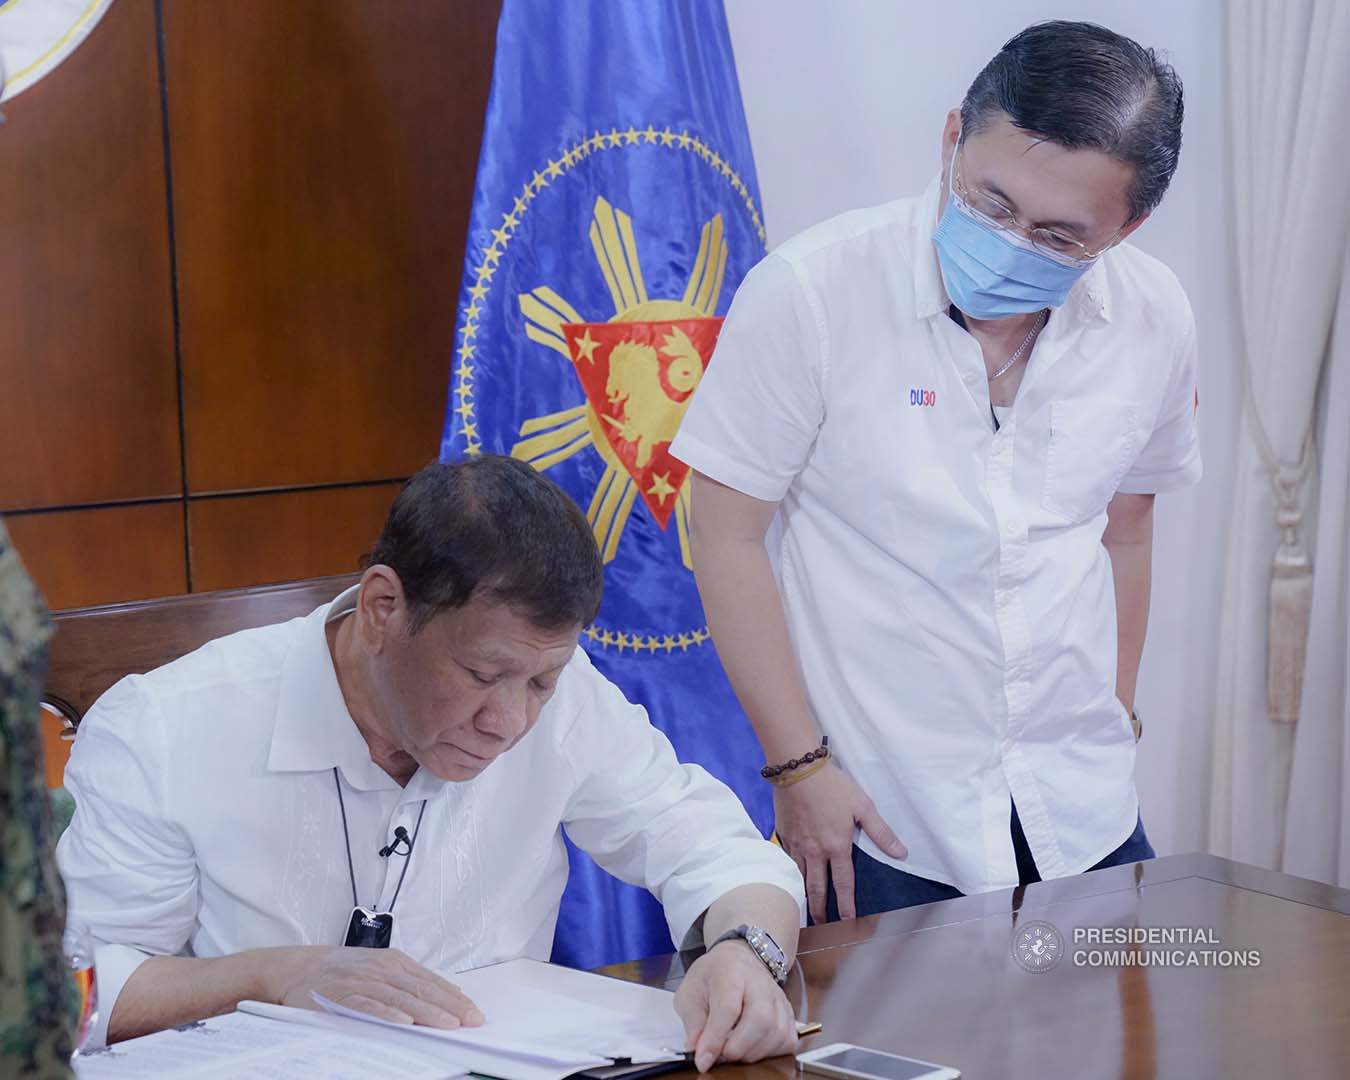 President Rodrigo Roa Duterte signs into law the establishment of the National Academy of Sports during a ceremony at the Presidential Guest House in Panacan, Davao City on June 9, 2020. With the President is Senator Christopher "Bong" Go. ARMAN BAYLON/PRESIDENTIAL PHOTO